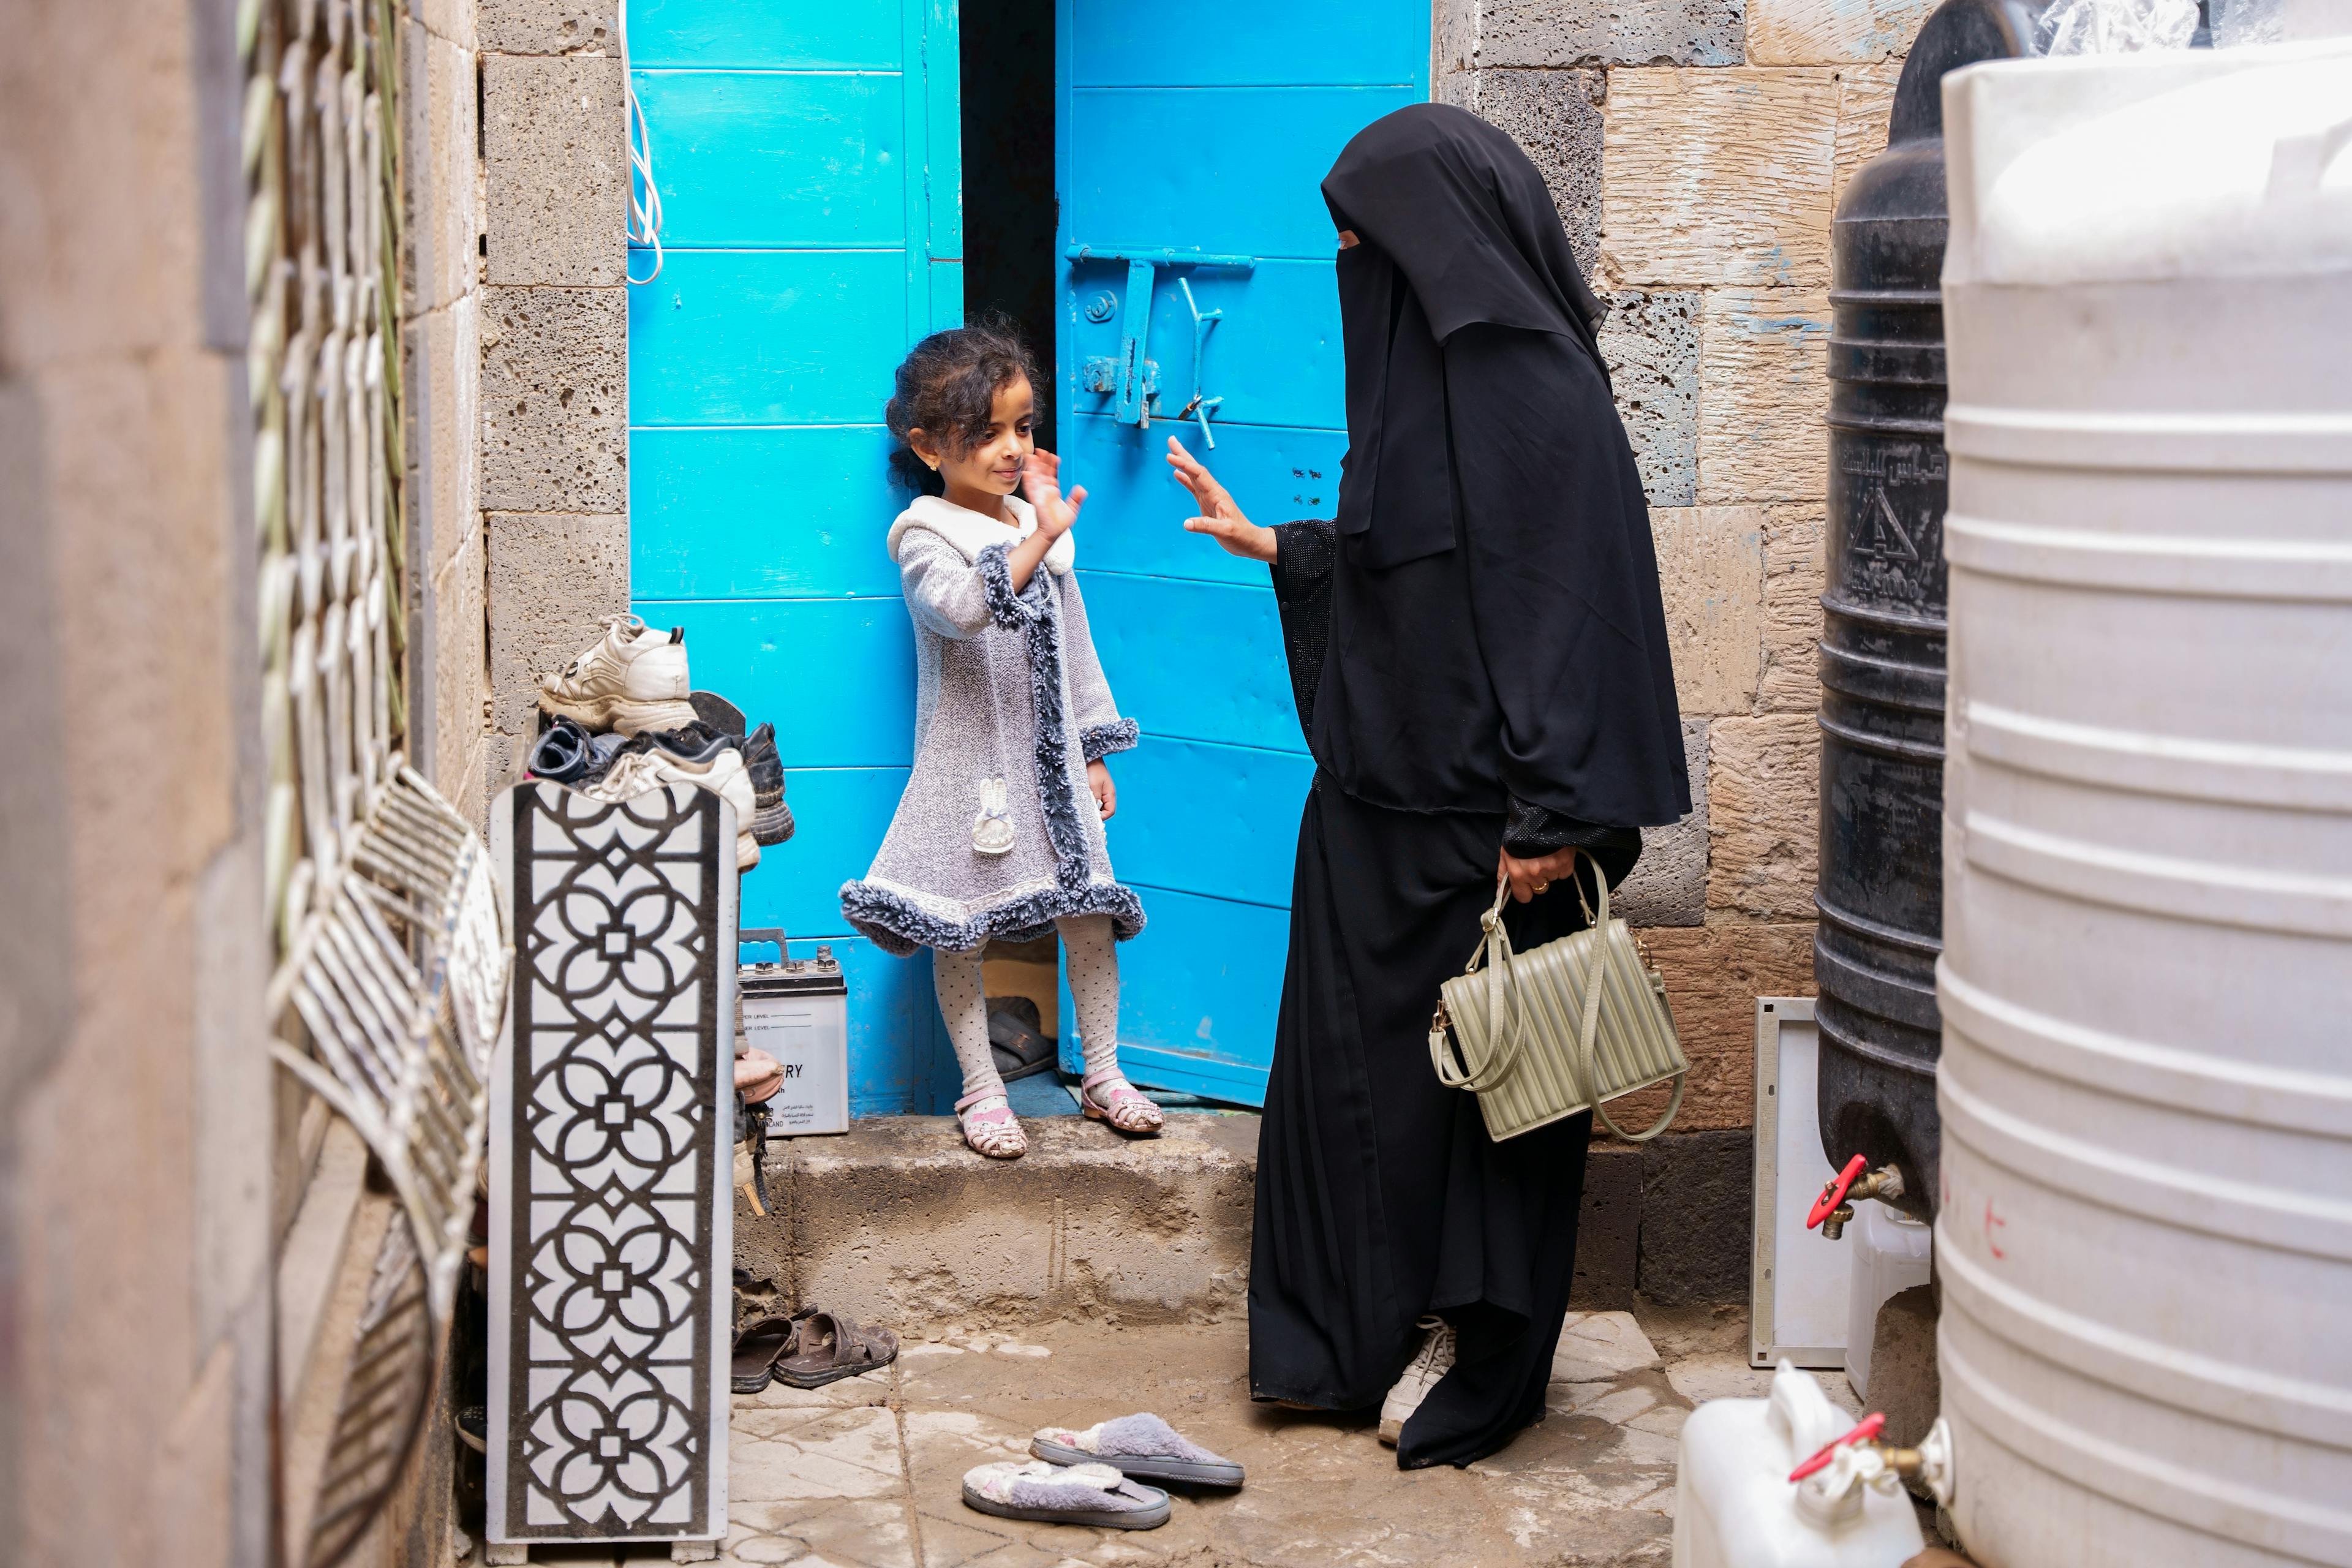 Suroor Al-Shama’a, a 33-year-old midwife, waves goodbye to her daughter before heading to work in Dhamar Governorate, Yemen.